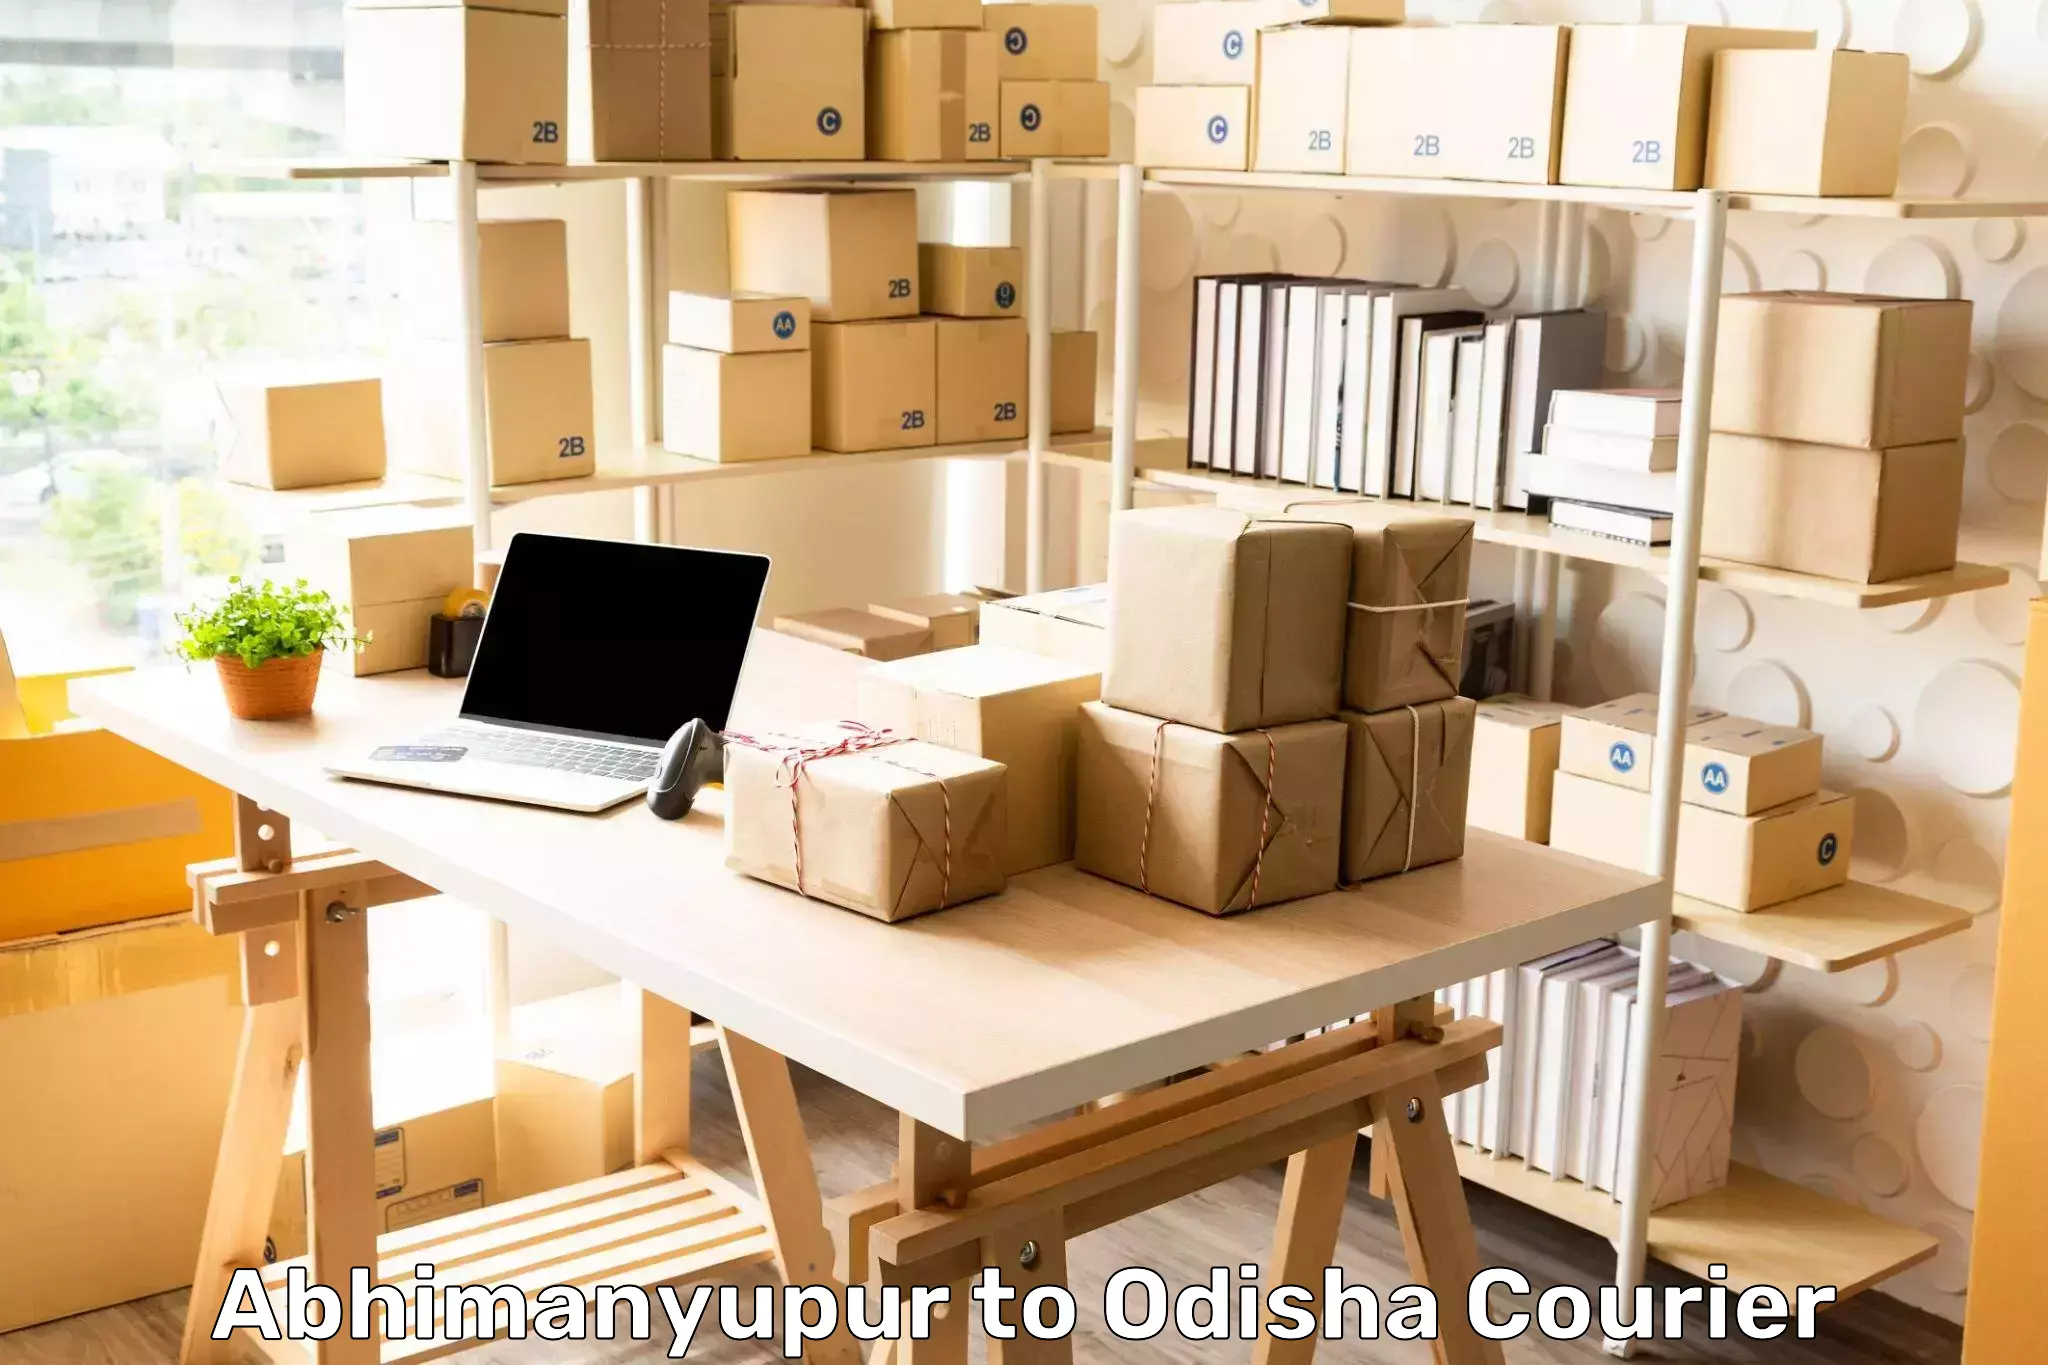 User-friendly delivery service Abhimanyupur to Odisha